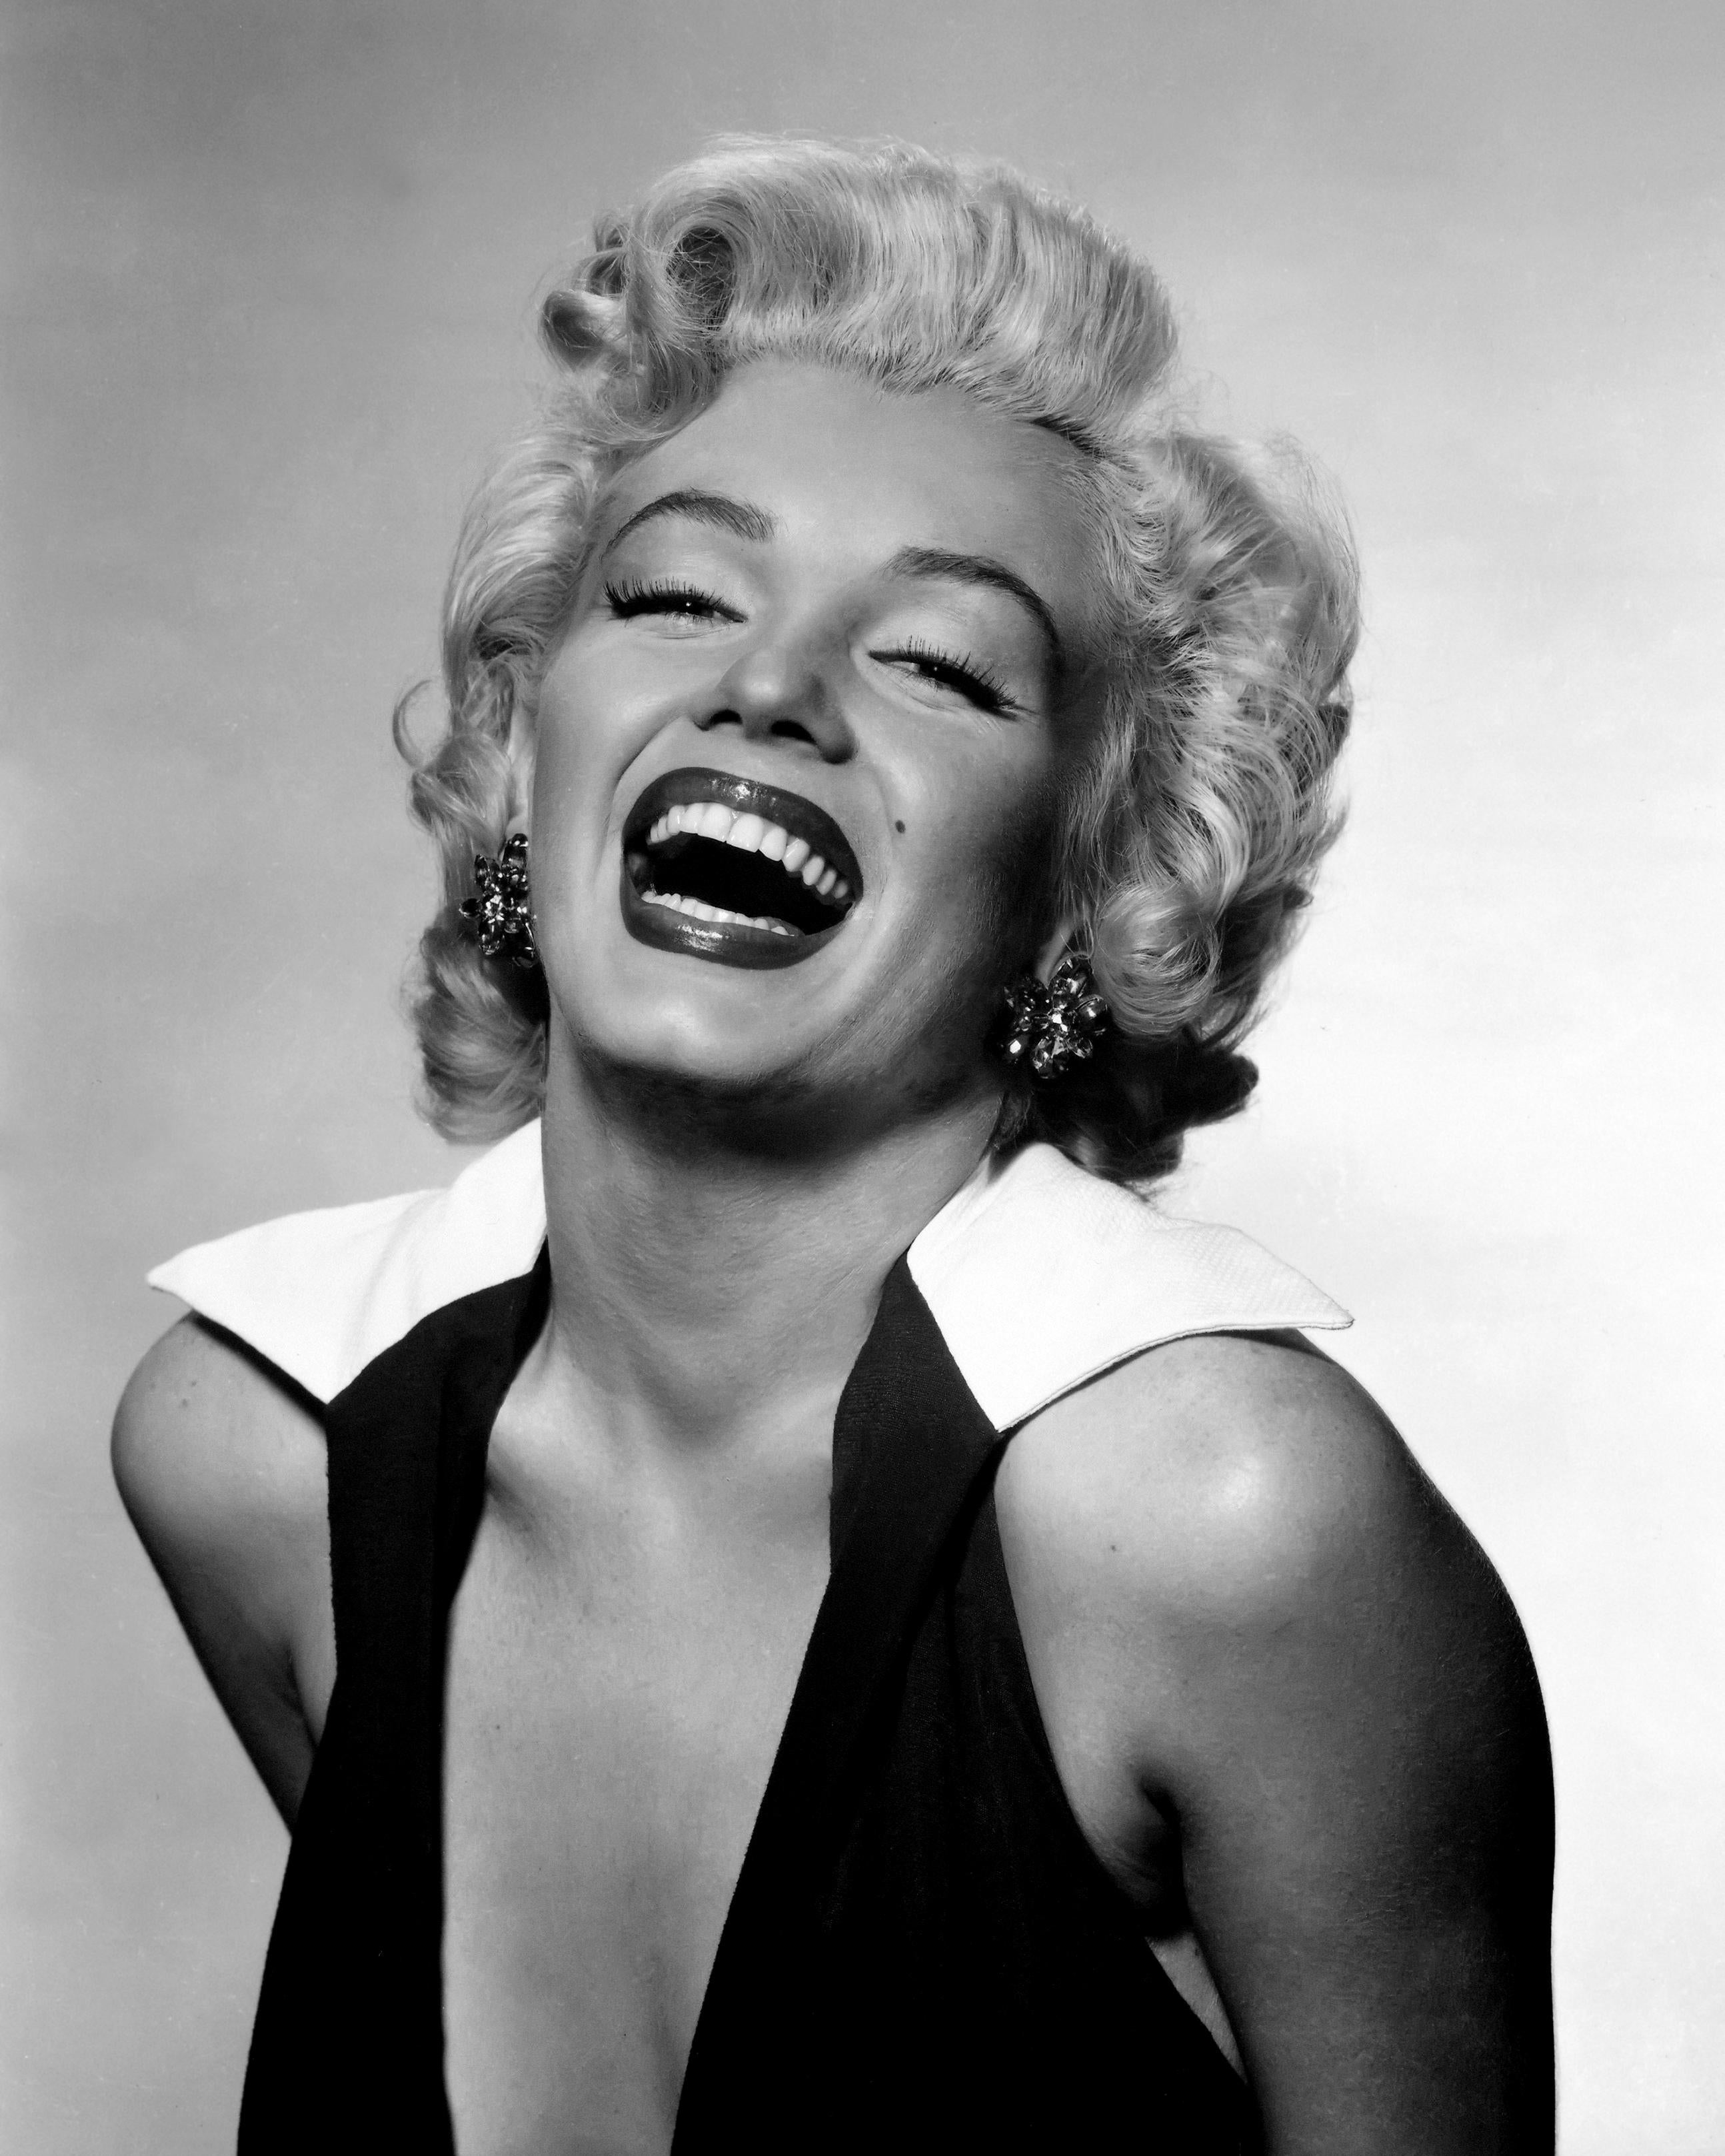 Unknown Portrait Photograph - Marilyn Monroe with Big Smile in the Studio Globe Photos Fine Art Print